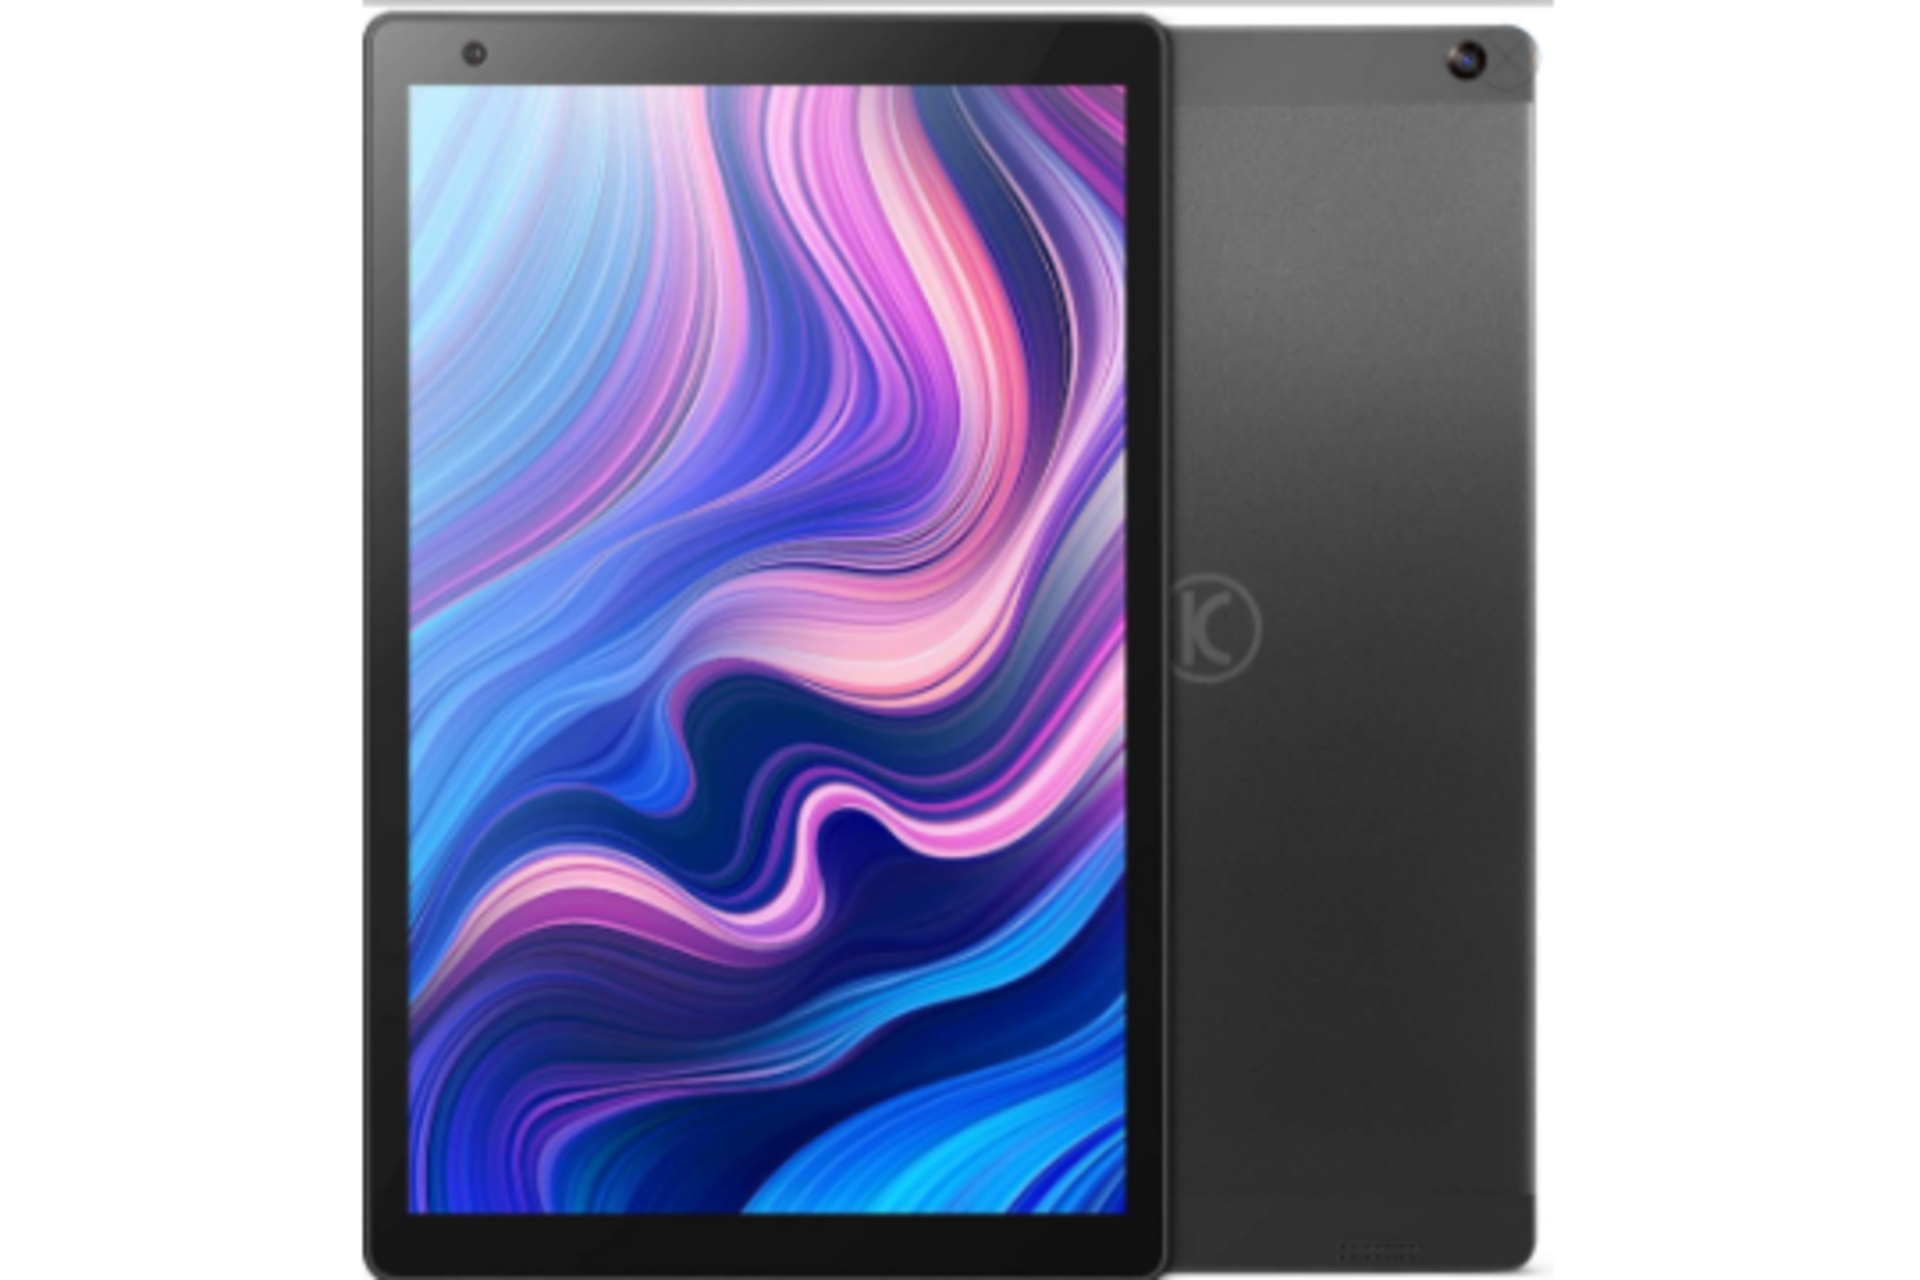 New Boxed VANKYO MatrixPad Z10 Tablet, Android 9.0 Pie, 3 GB RAM, 10.1" 1080p Full HD Display. - Image 2 of 3